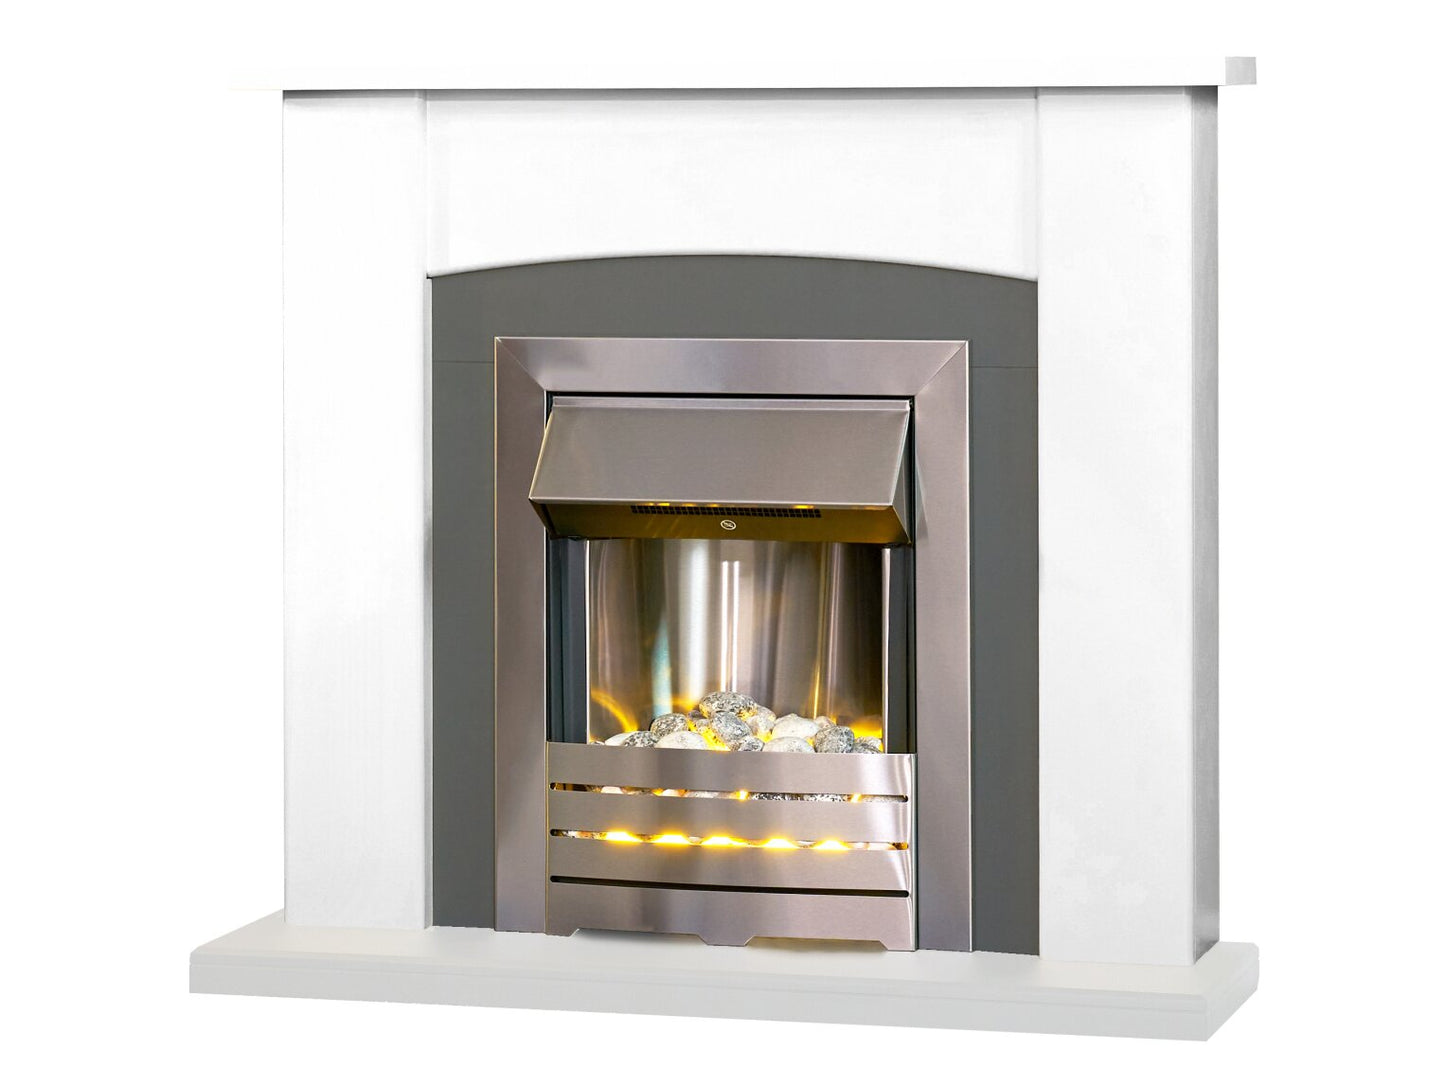 Adam Holden Fireplace in Pure White & Grey/White with Helios Electric Fire in Brushed Steel, 39 Inch